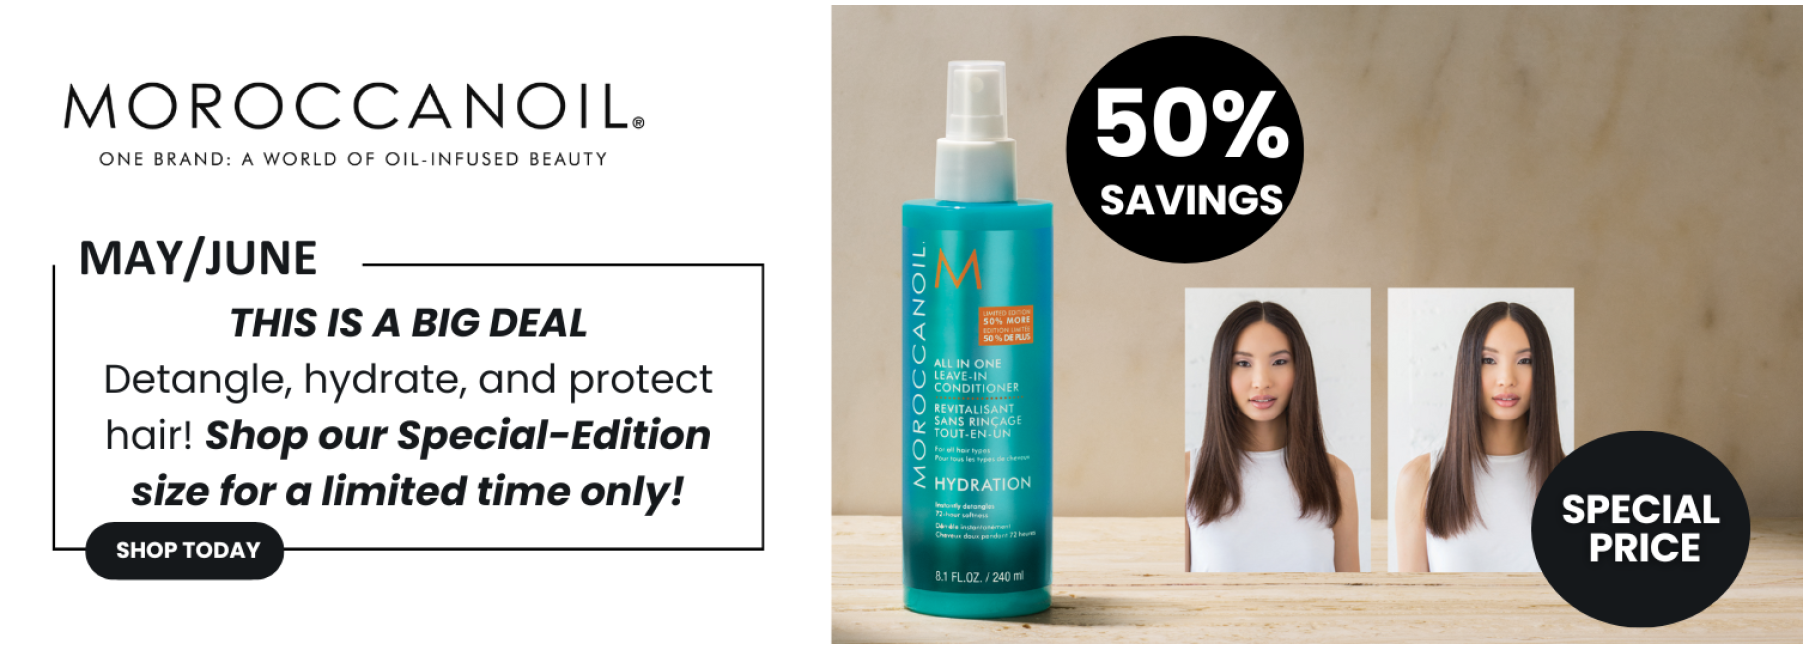 MOROCCANOIL ALL IN ONE CONDITIONER BONUS SIZE OFFER MAY_JUNE